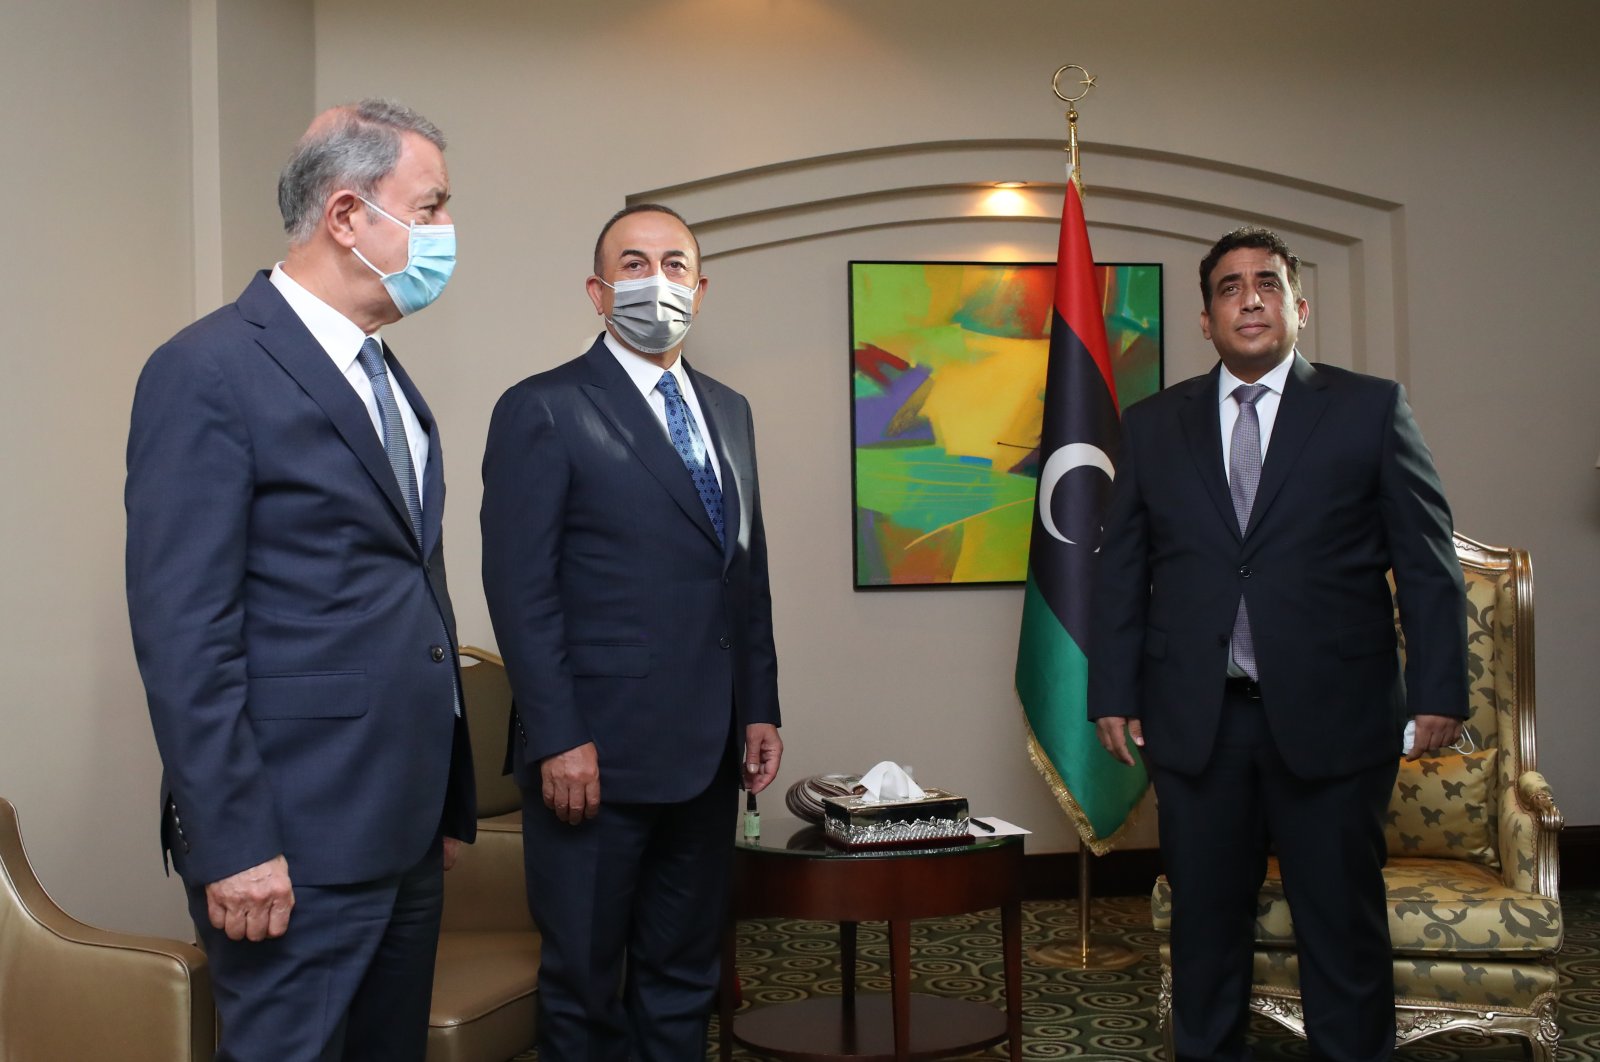 From left to right, Defense Minister Hulusi Akar, Foreign Minister Mevlüt Çavuşoğlu and head of Libya's Presidential Council, Mohammad Younes Menfi meet in Tripoli, Libya, May 3, 2021. (AA Photo)